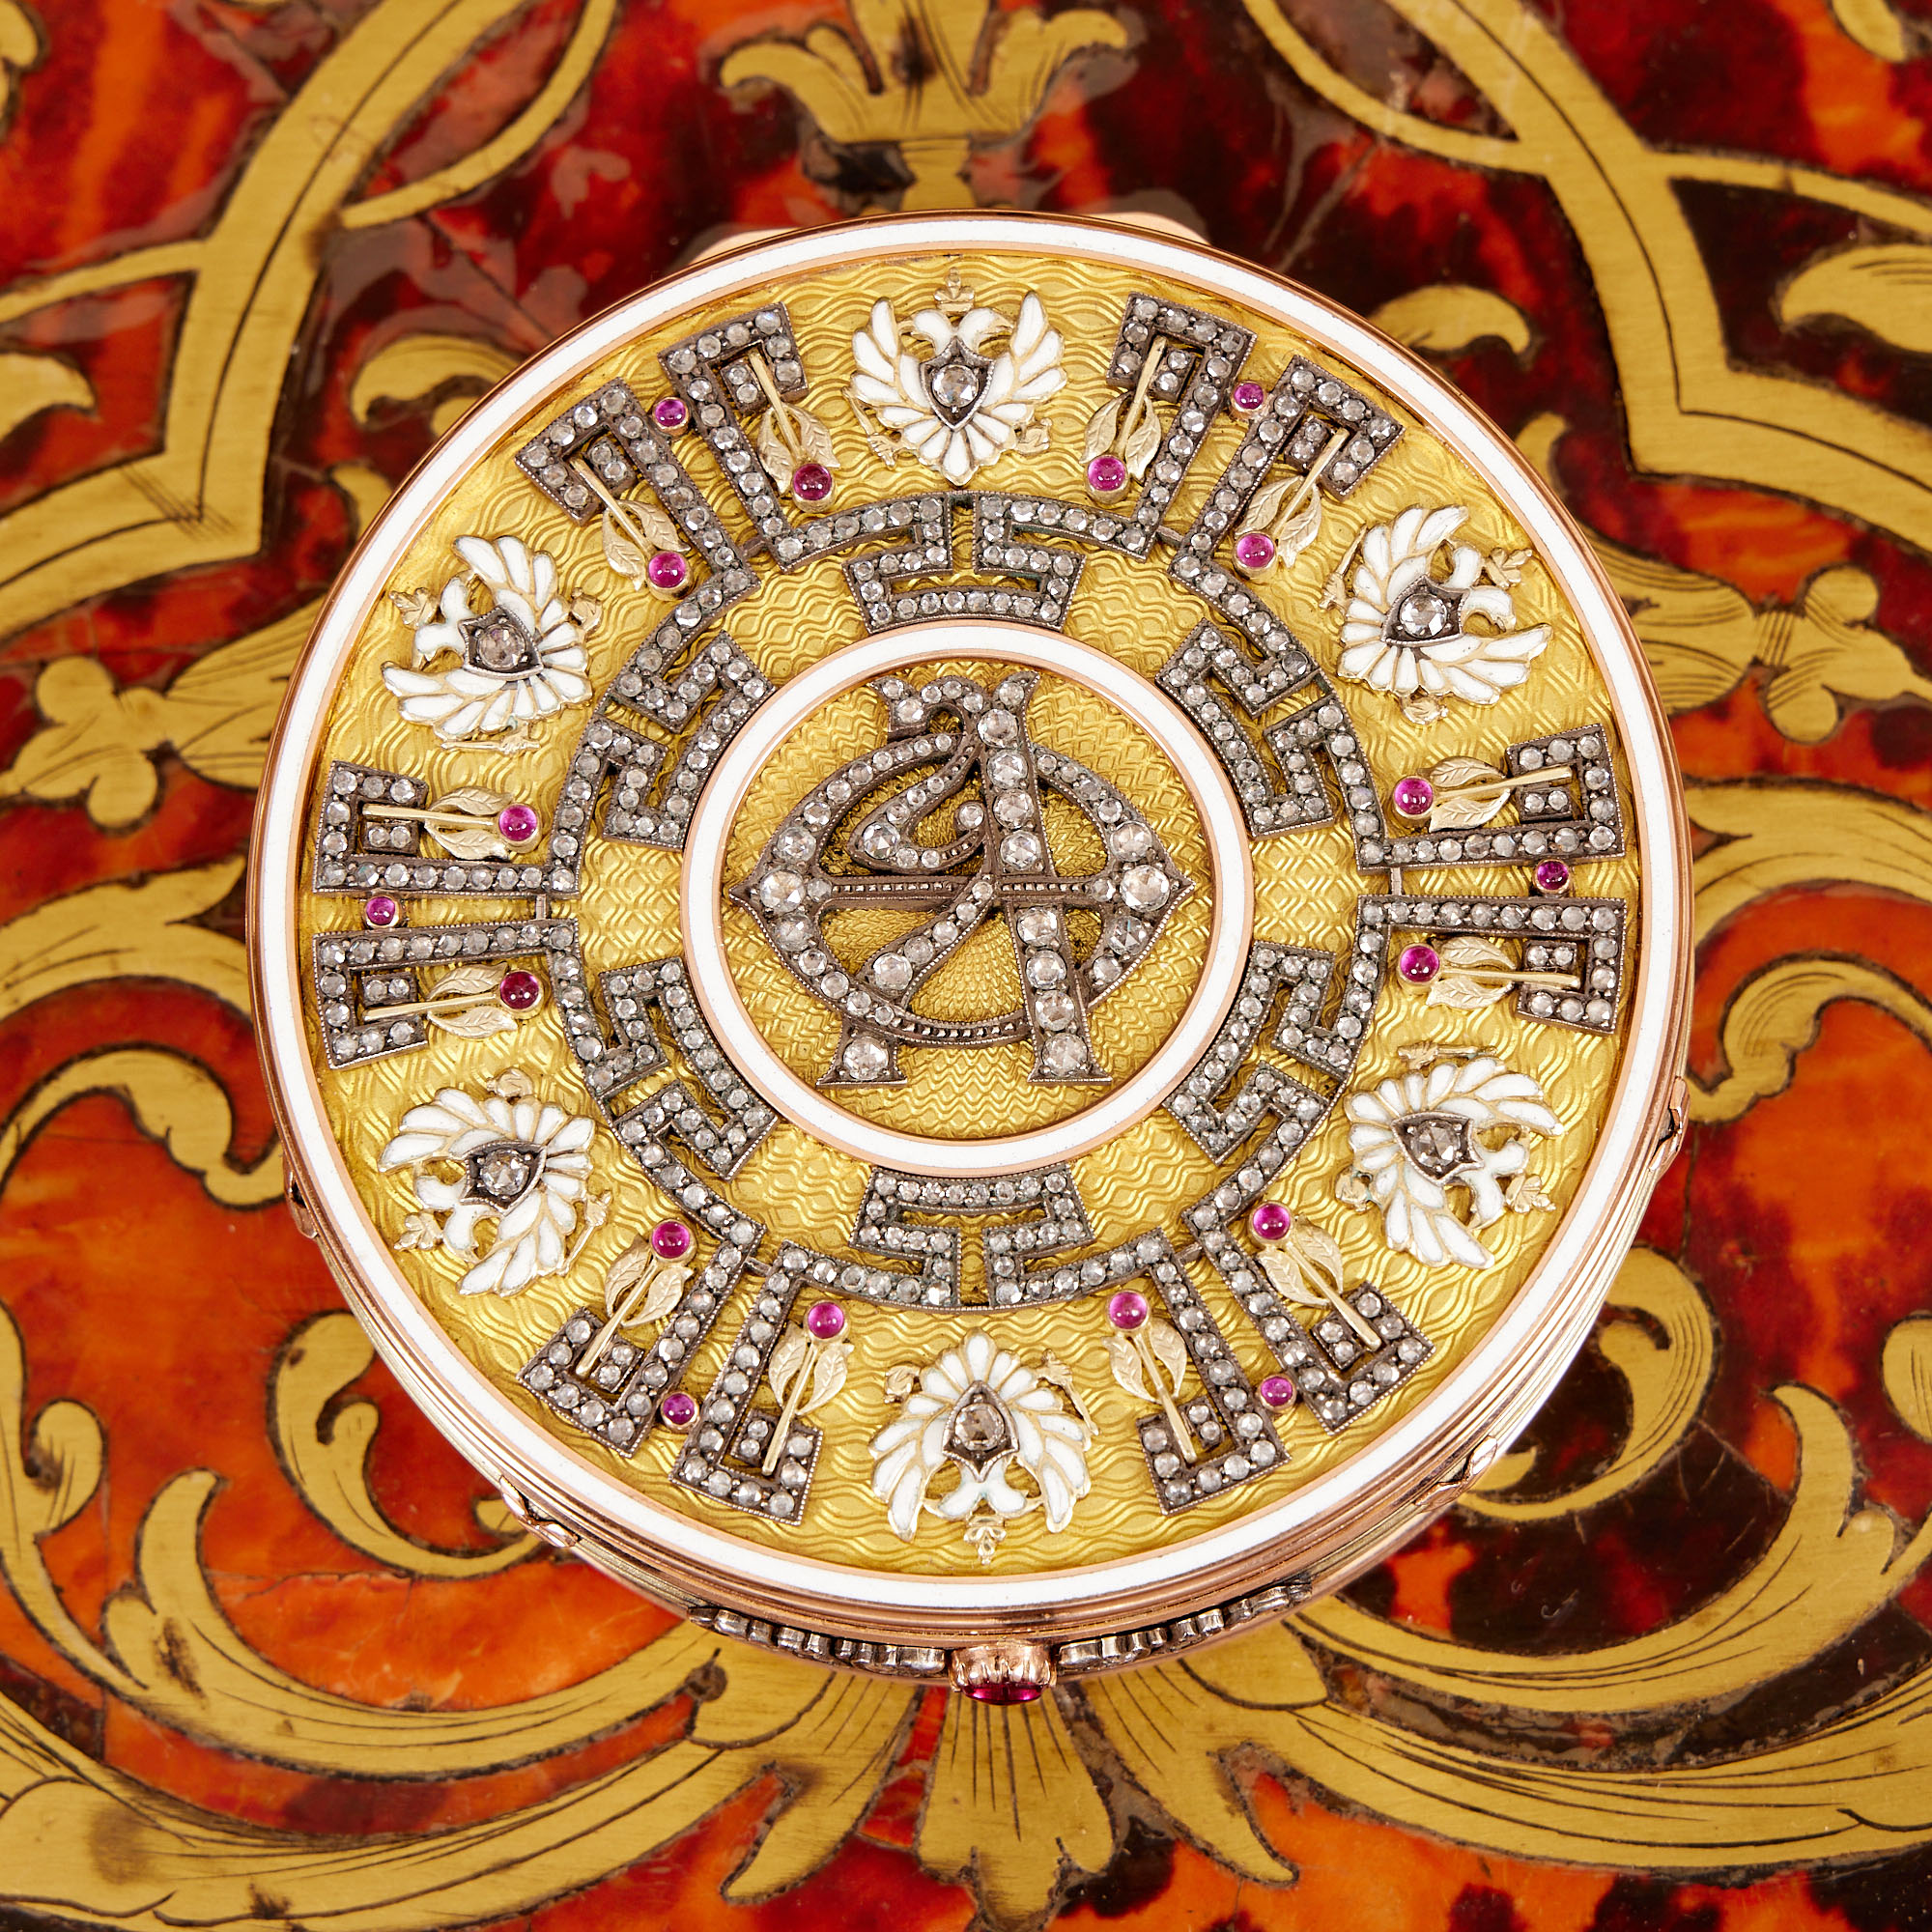 A 14 CARAT GOLD, DIAMOND AND ENAMEL BOX IN THE STYLE OF FABERGE - Image 5 of 6